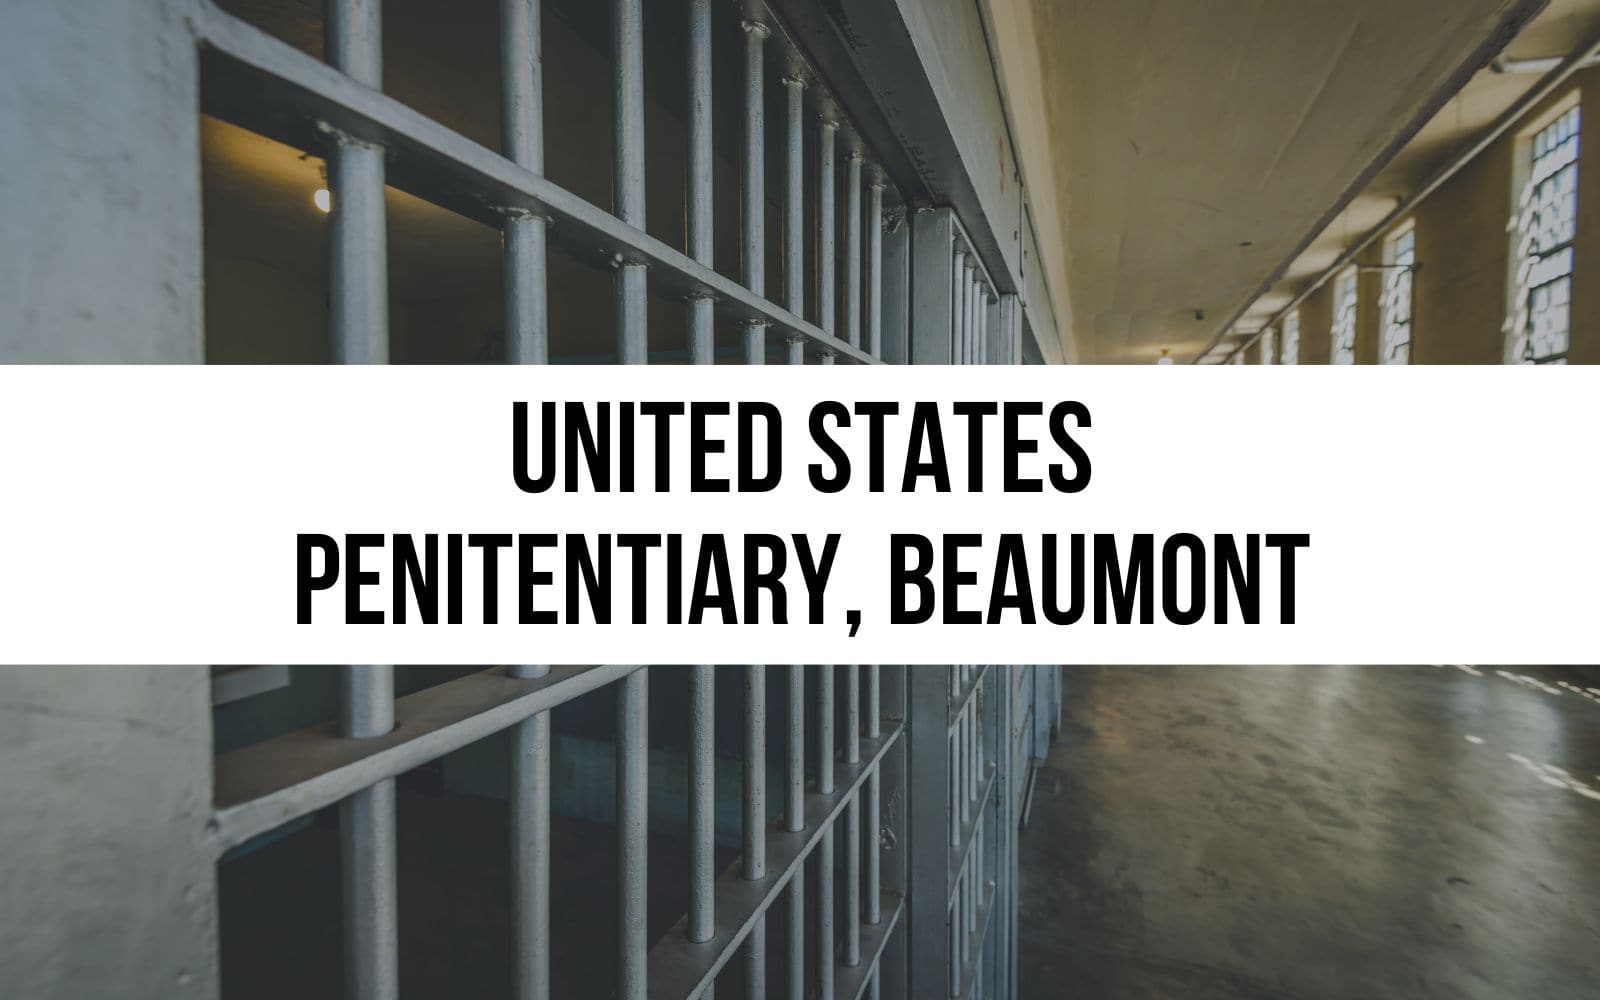 United States Penitentiary, Beaumont